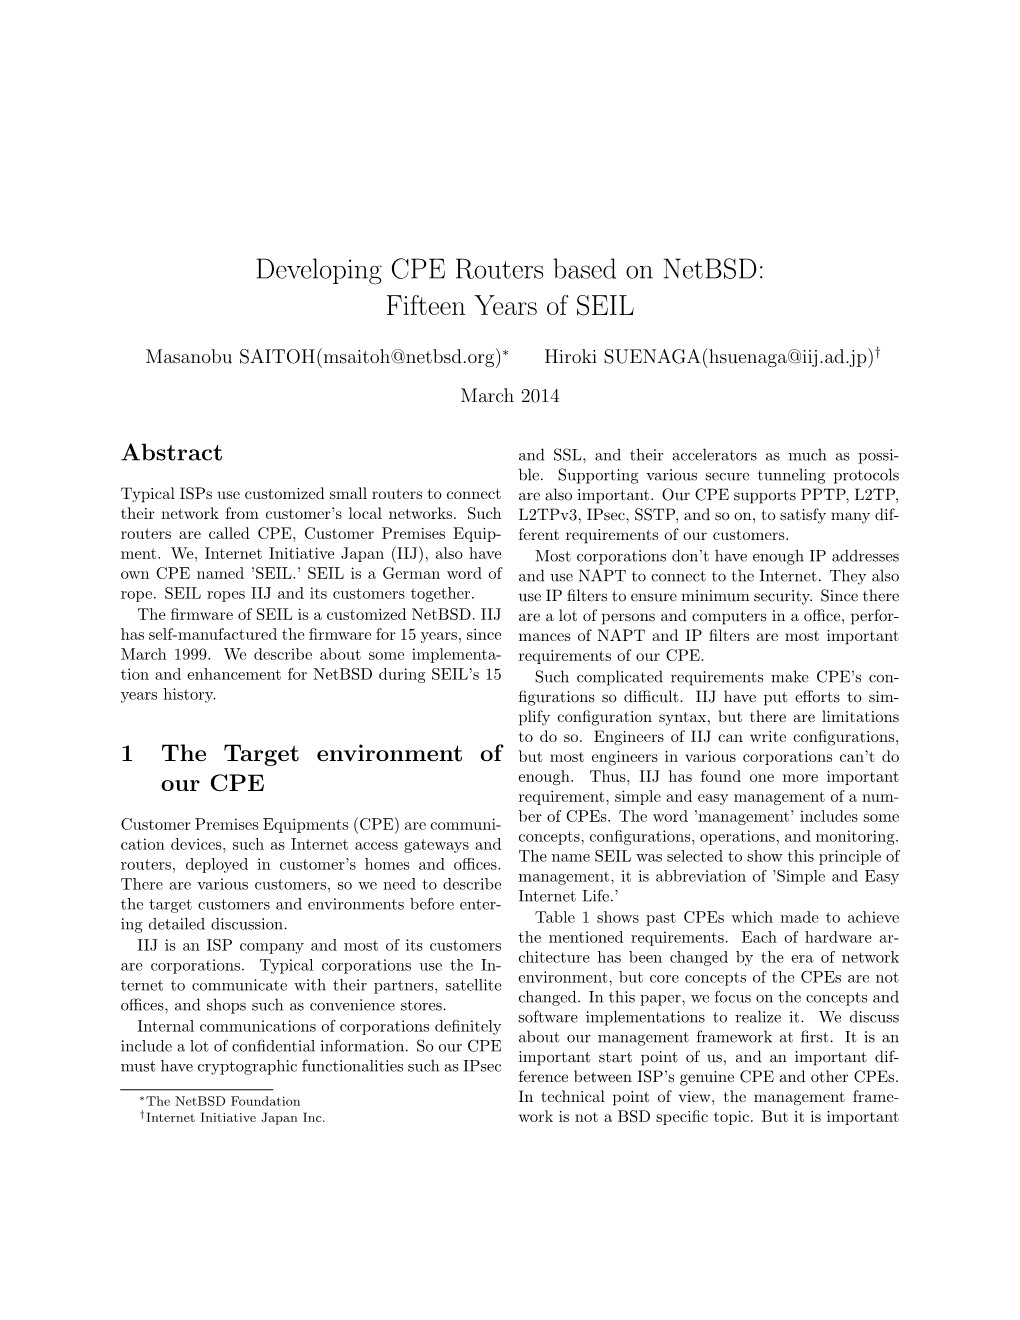 Developing CPE Routers Based on Netbsd: Fifteen Years of SEIL